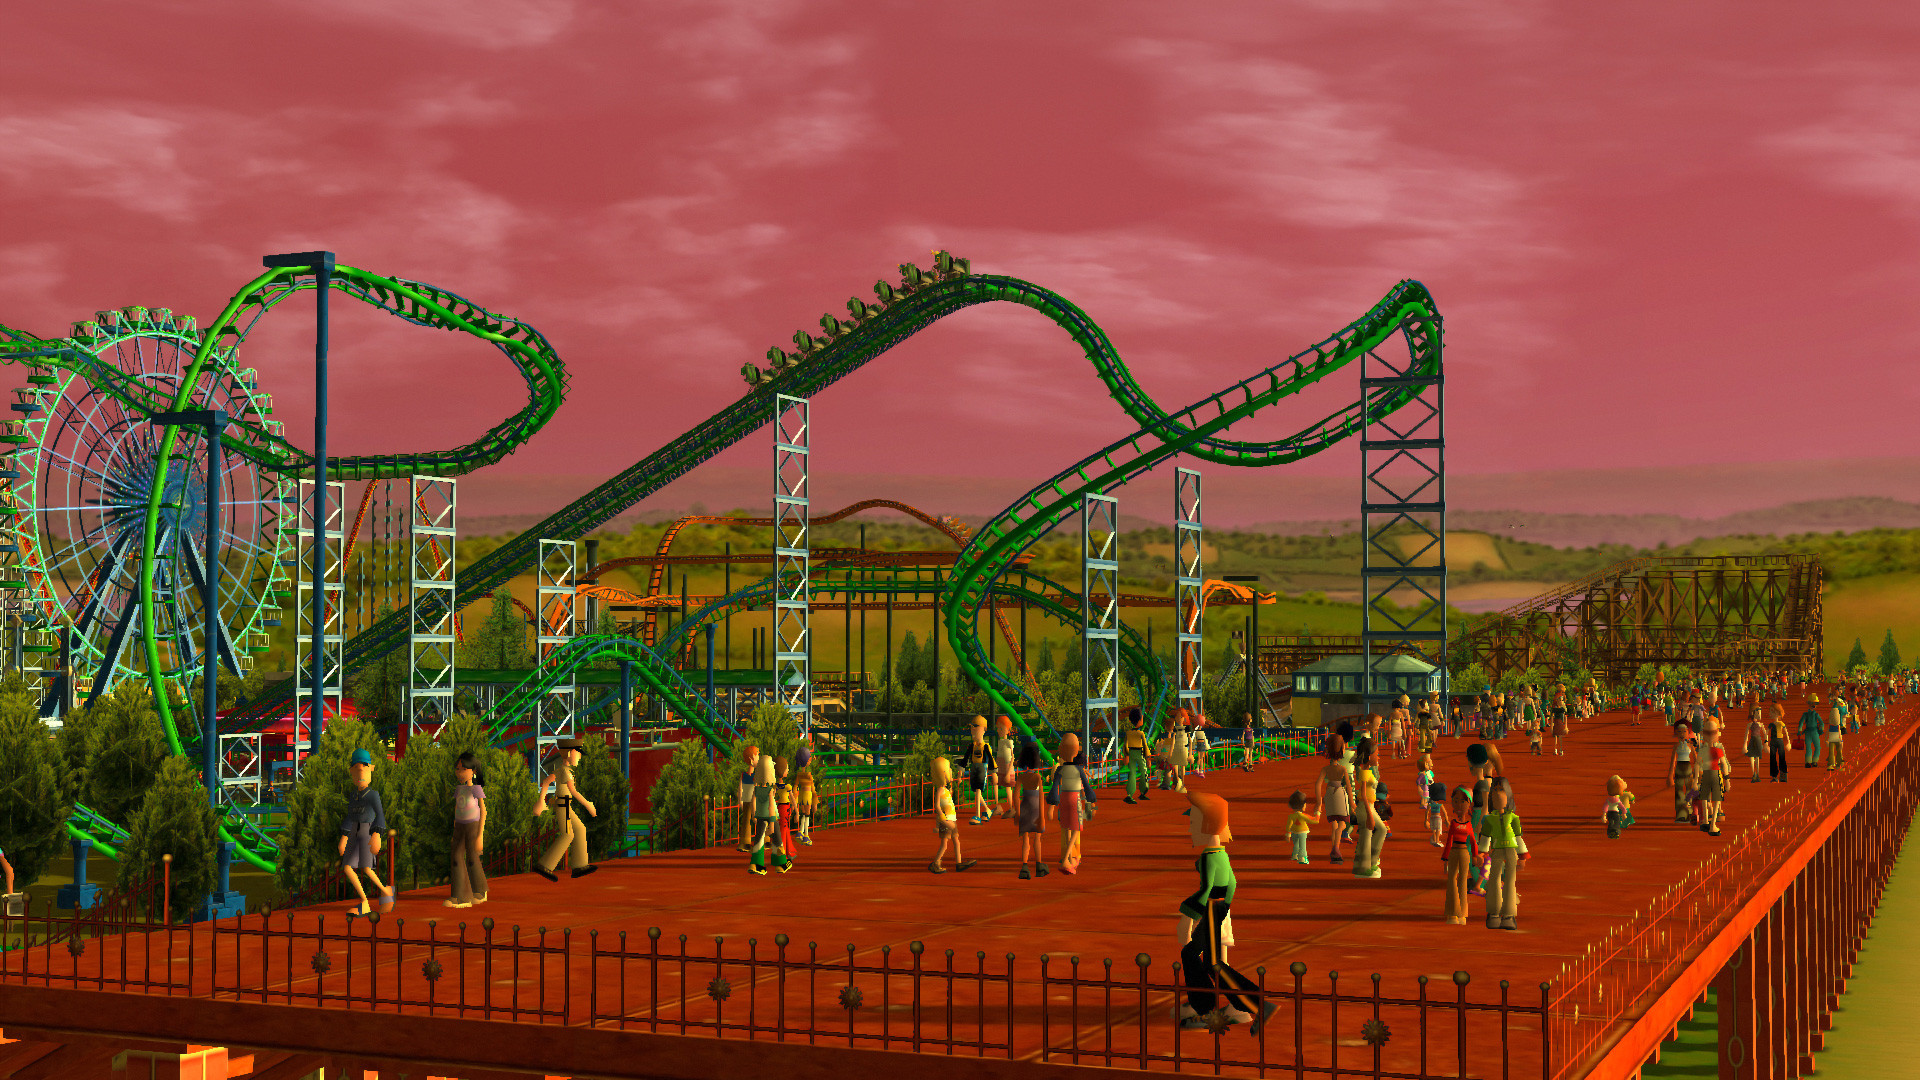 rollercoaster tycoon world activation key free